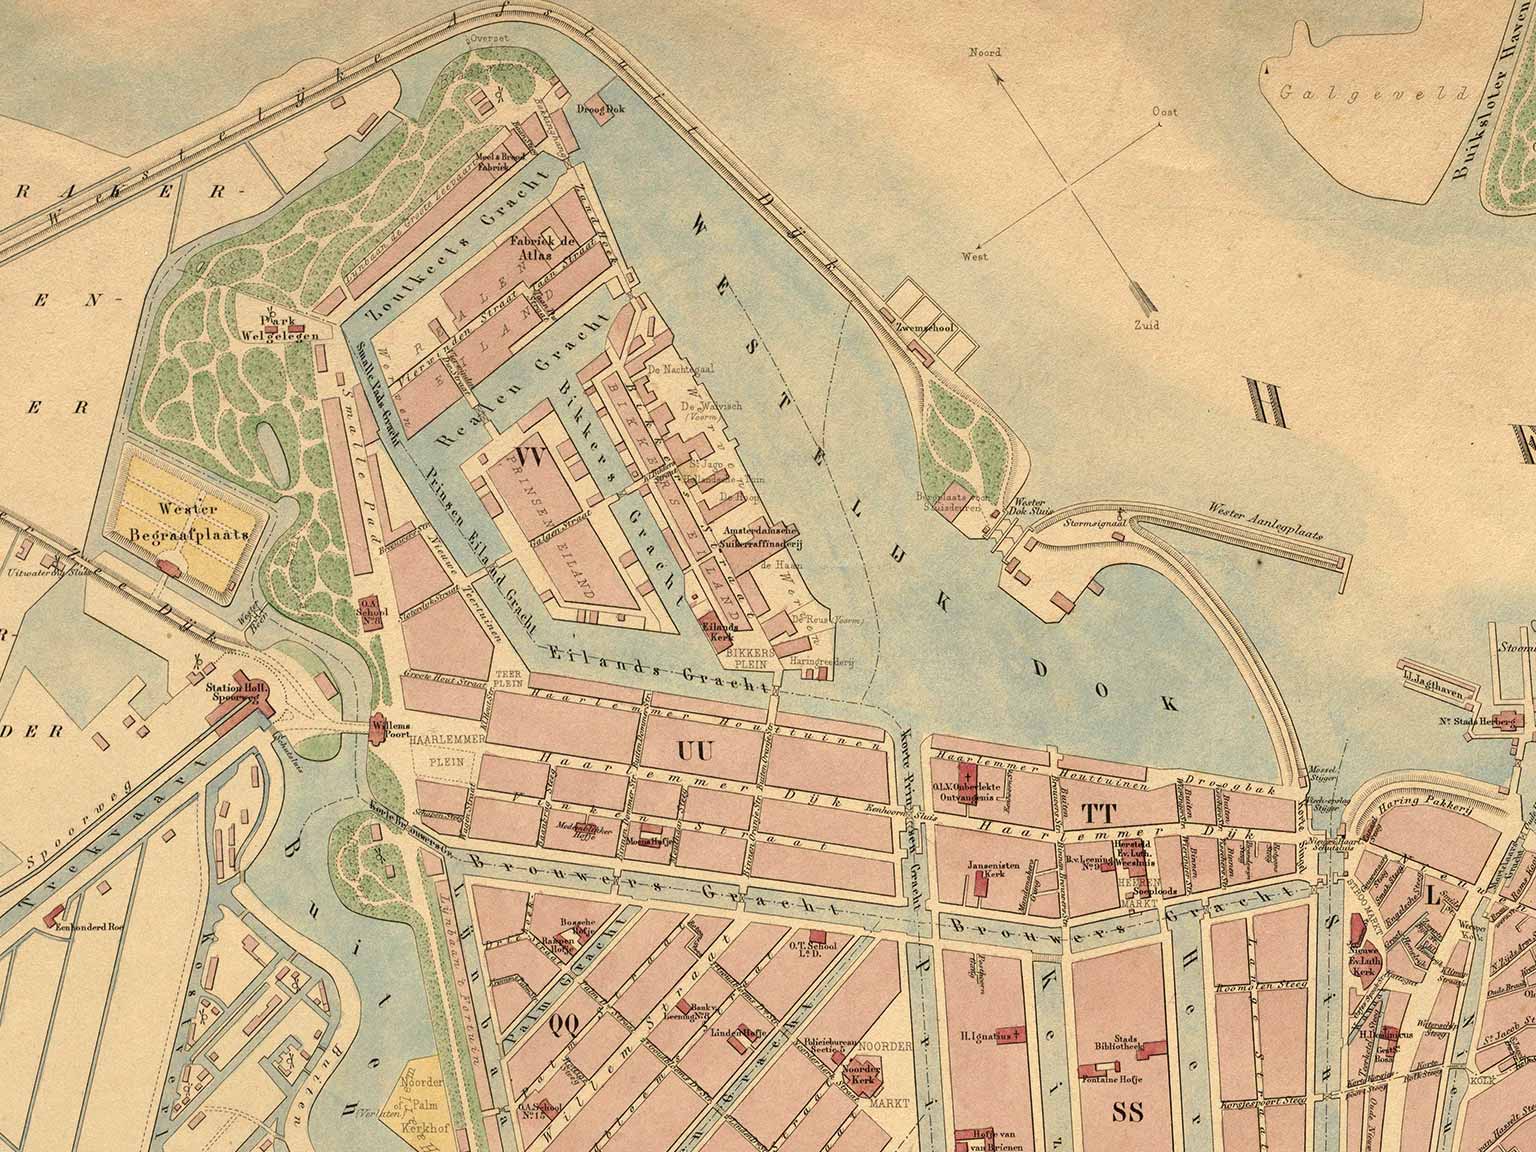 Western Islands and Westerdoksdijk, Amsterdam, on a map from 1867